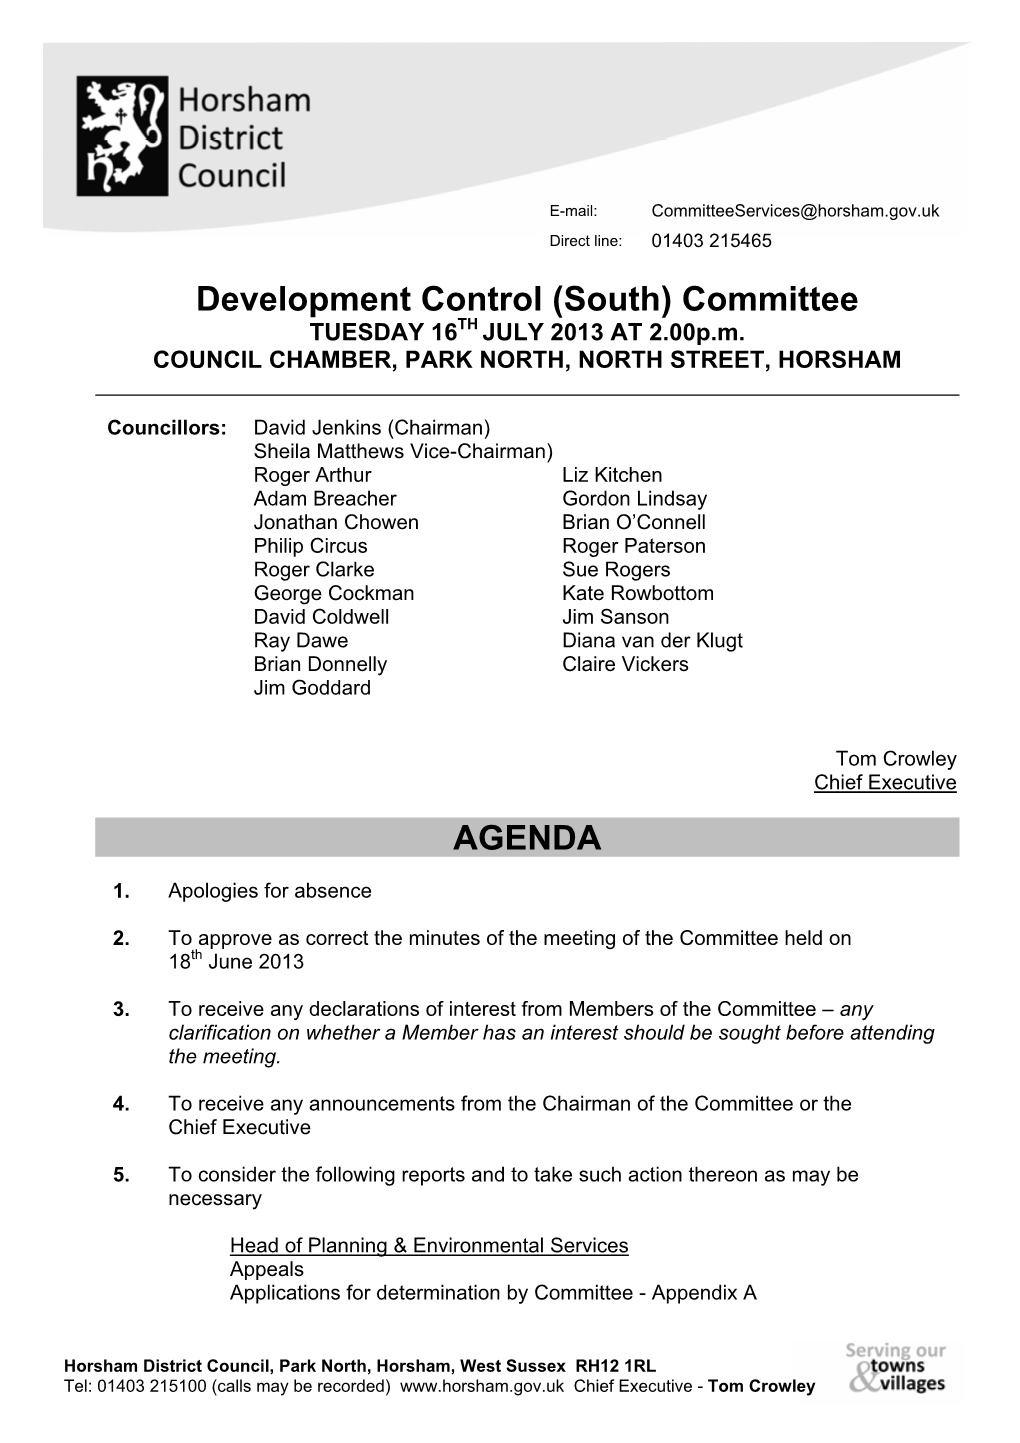 Development Control (South) Committee TUESDAY 16TH JULY 2013 at 2.00P.M